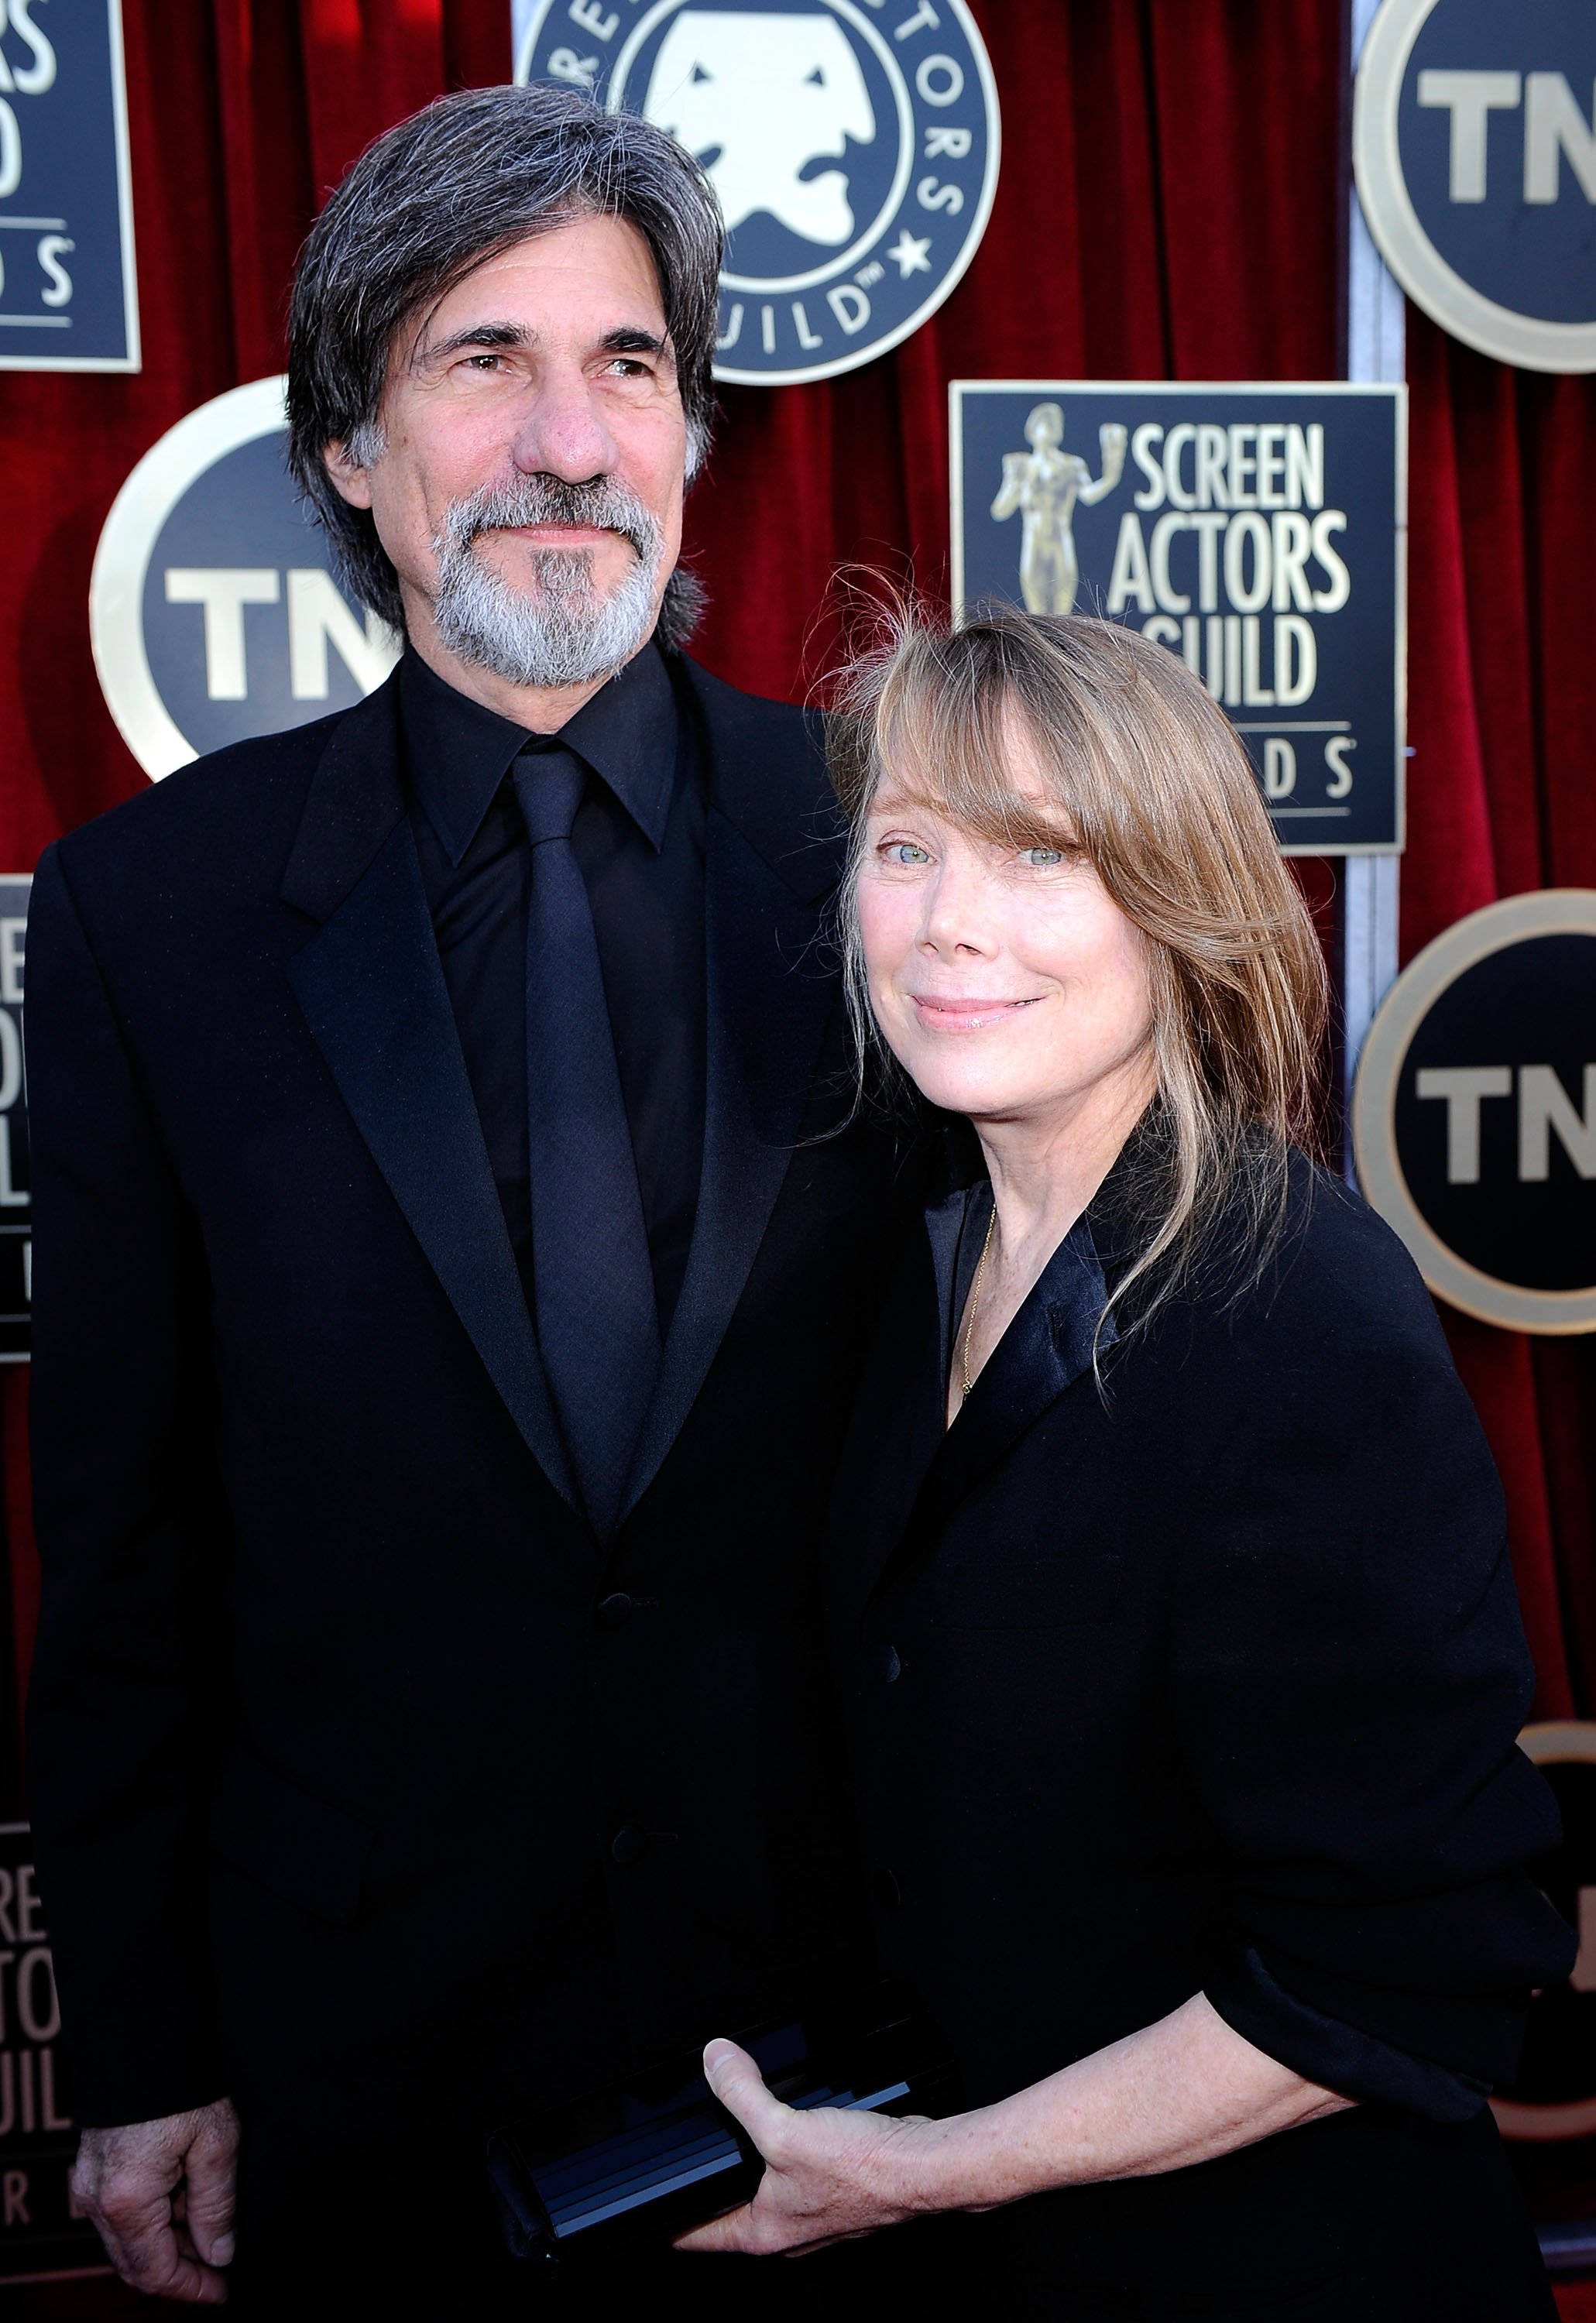 Sissy Spacek and Jack Fisk at The Shrine Auditorium on January 29, 2012, in Los Angeles, California. | Source: Getty Images